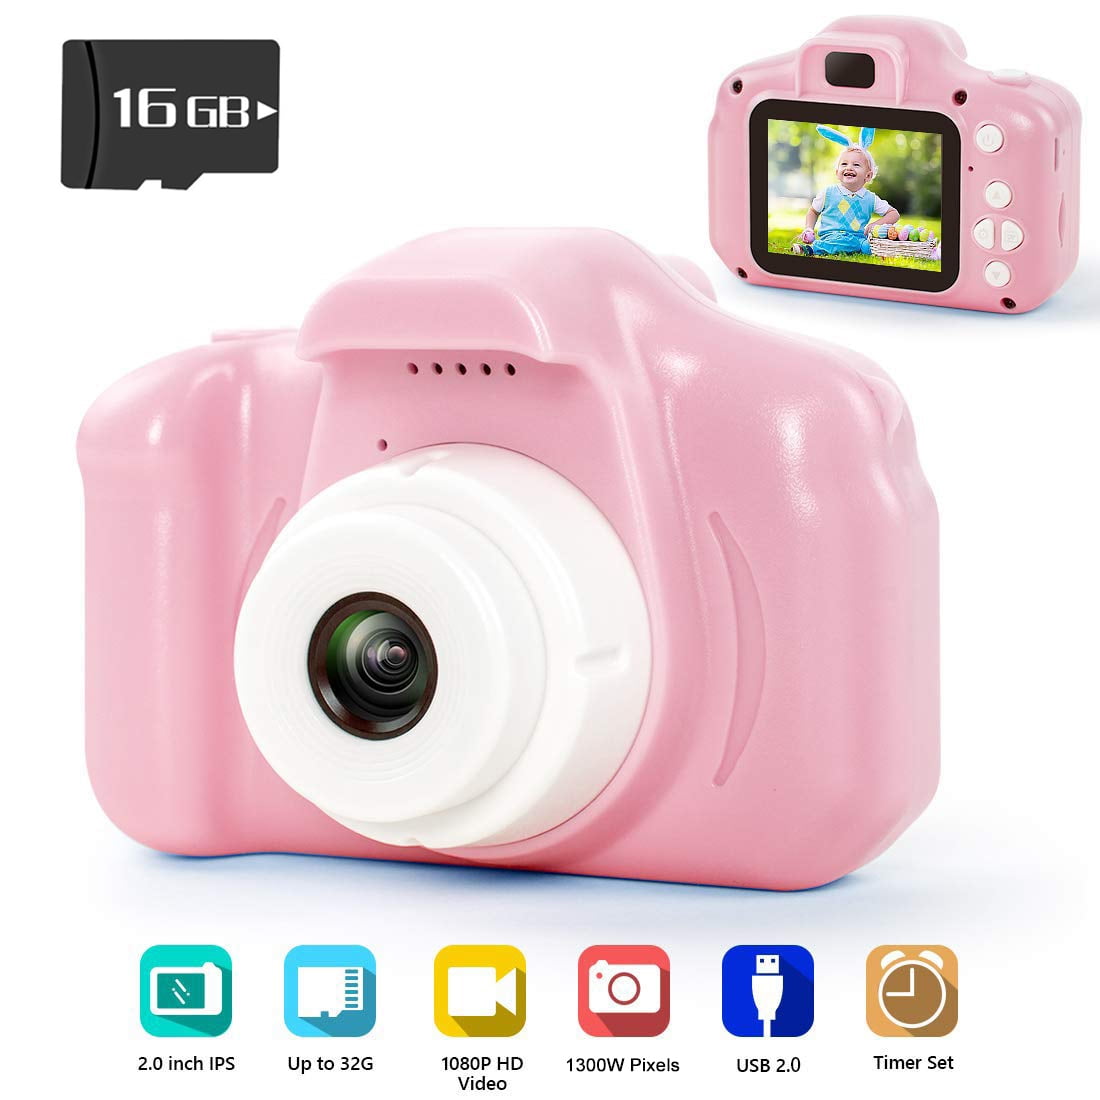 Digital Camera for Kids Children Camera 1080HD IPS Eye Protection Mini Toy Camera Gift for 3-12 Years Old Boys and Girls Rechargeable Kids Selfie Photo Video Camera Camcorder with 16GB SD Card 